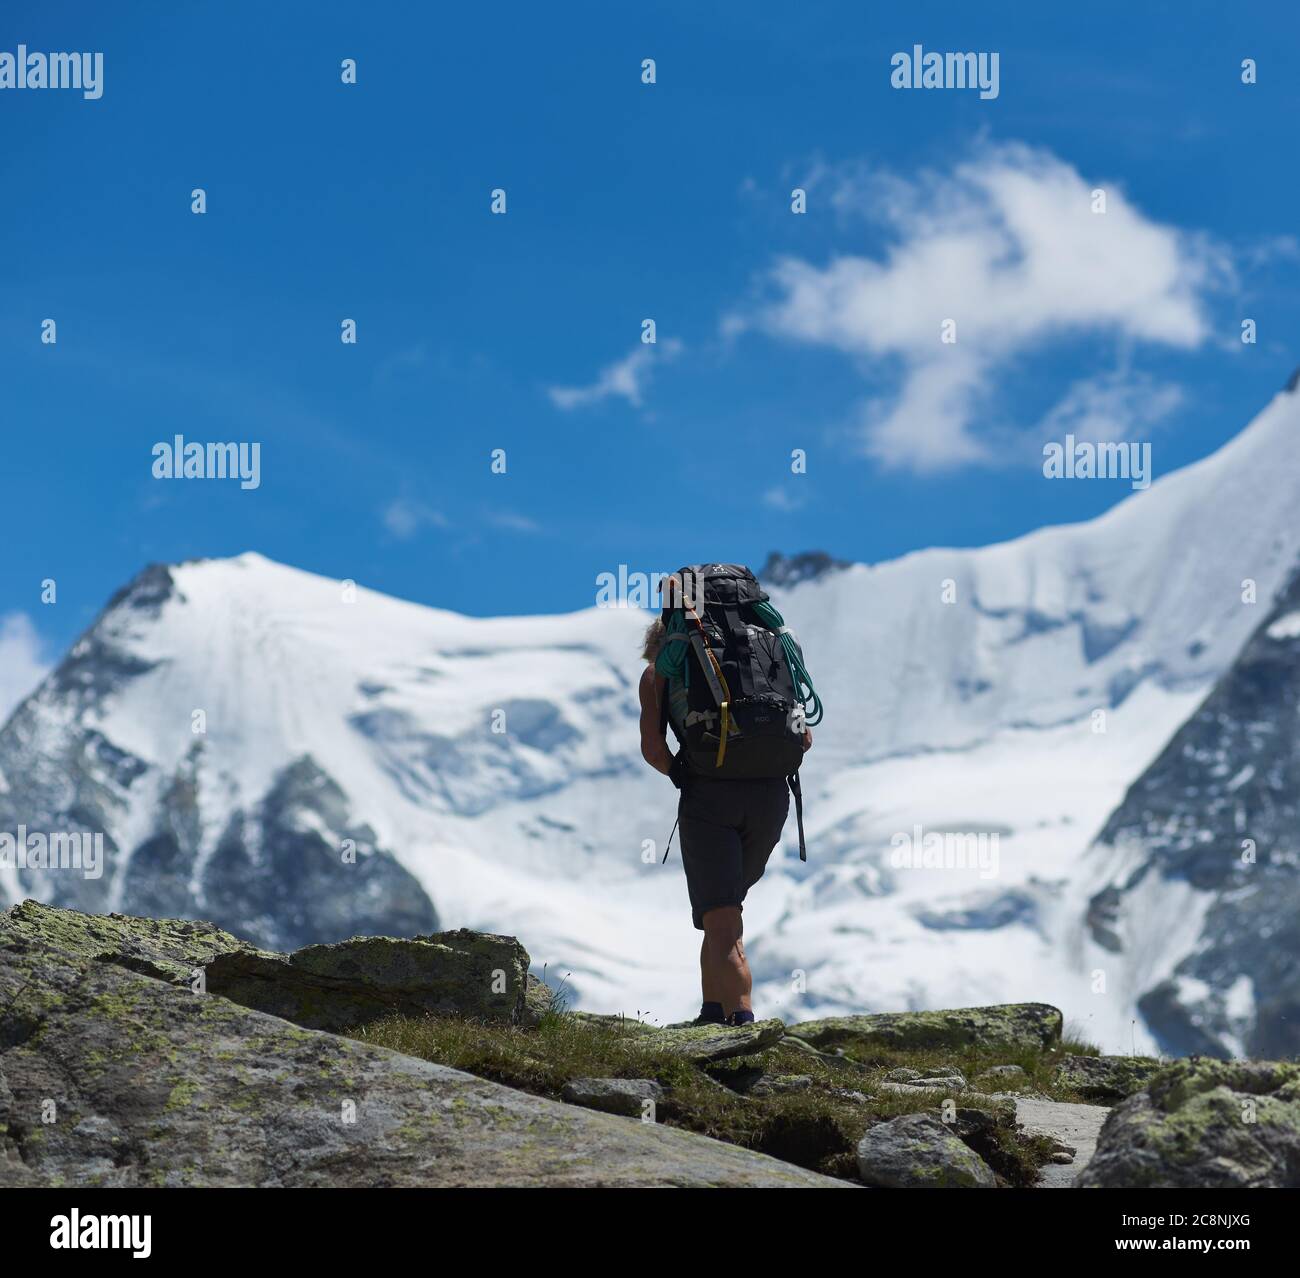 Zinal, Switzerland - July 19, 2019: Back view of traveler with backpack hiking alone in mountainous region. Backpacker walking down hillside road with snowy mountain and blue sky on background Stock Photo